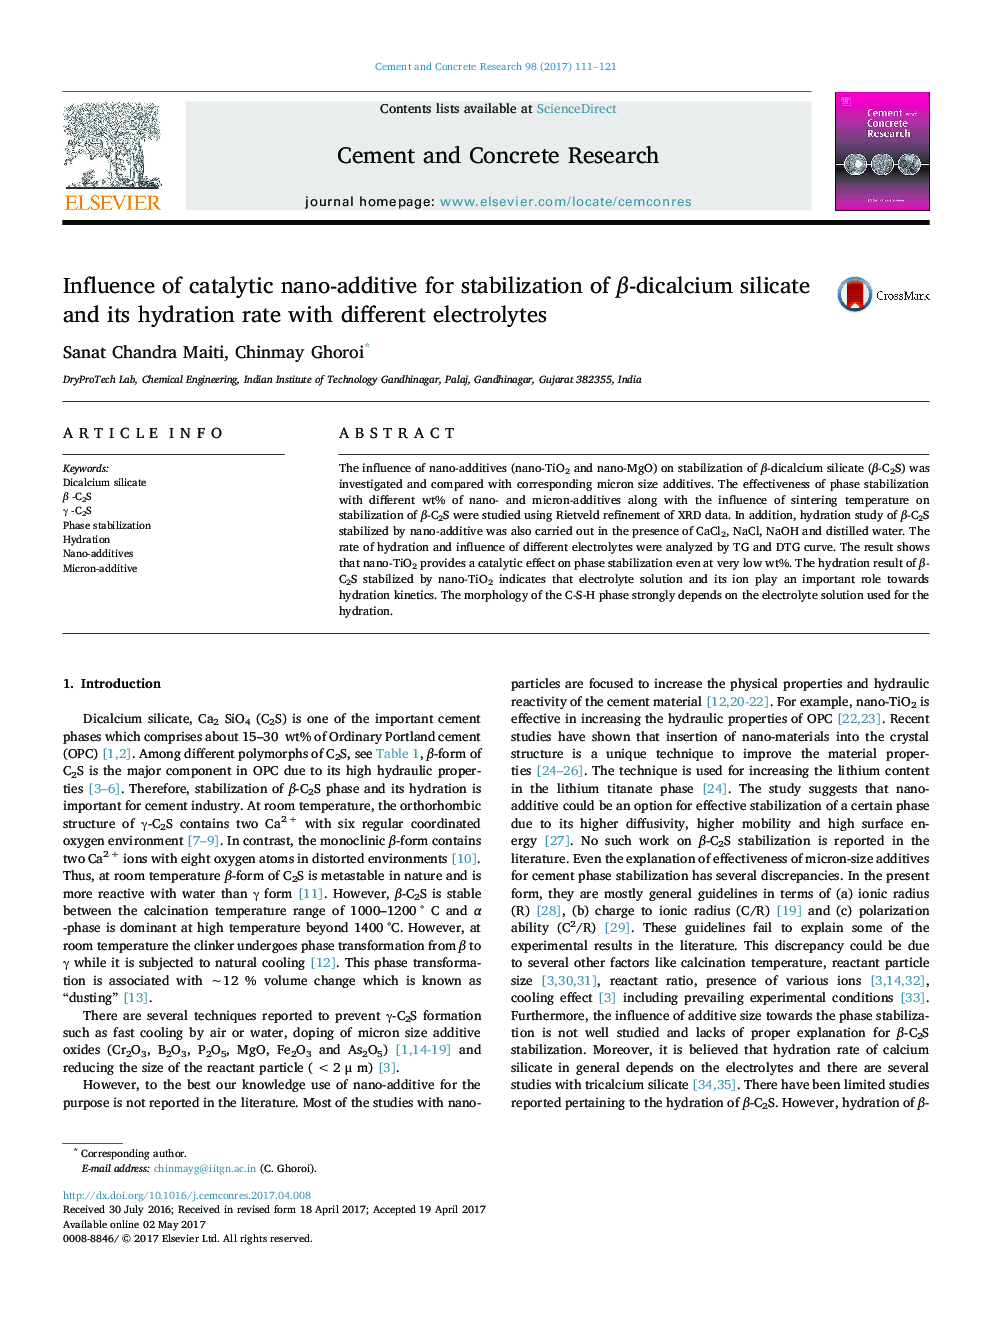 Influence of catalytic nano-additive for stabilization of Î²-dicalcium silicate and its hydration rate with different electrolytes